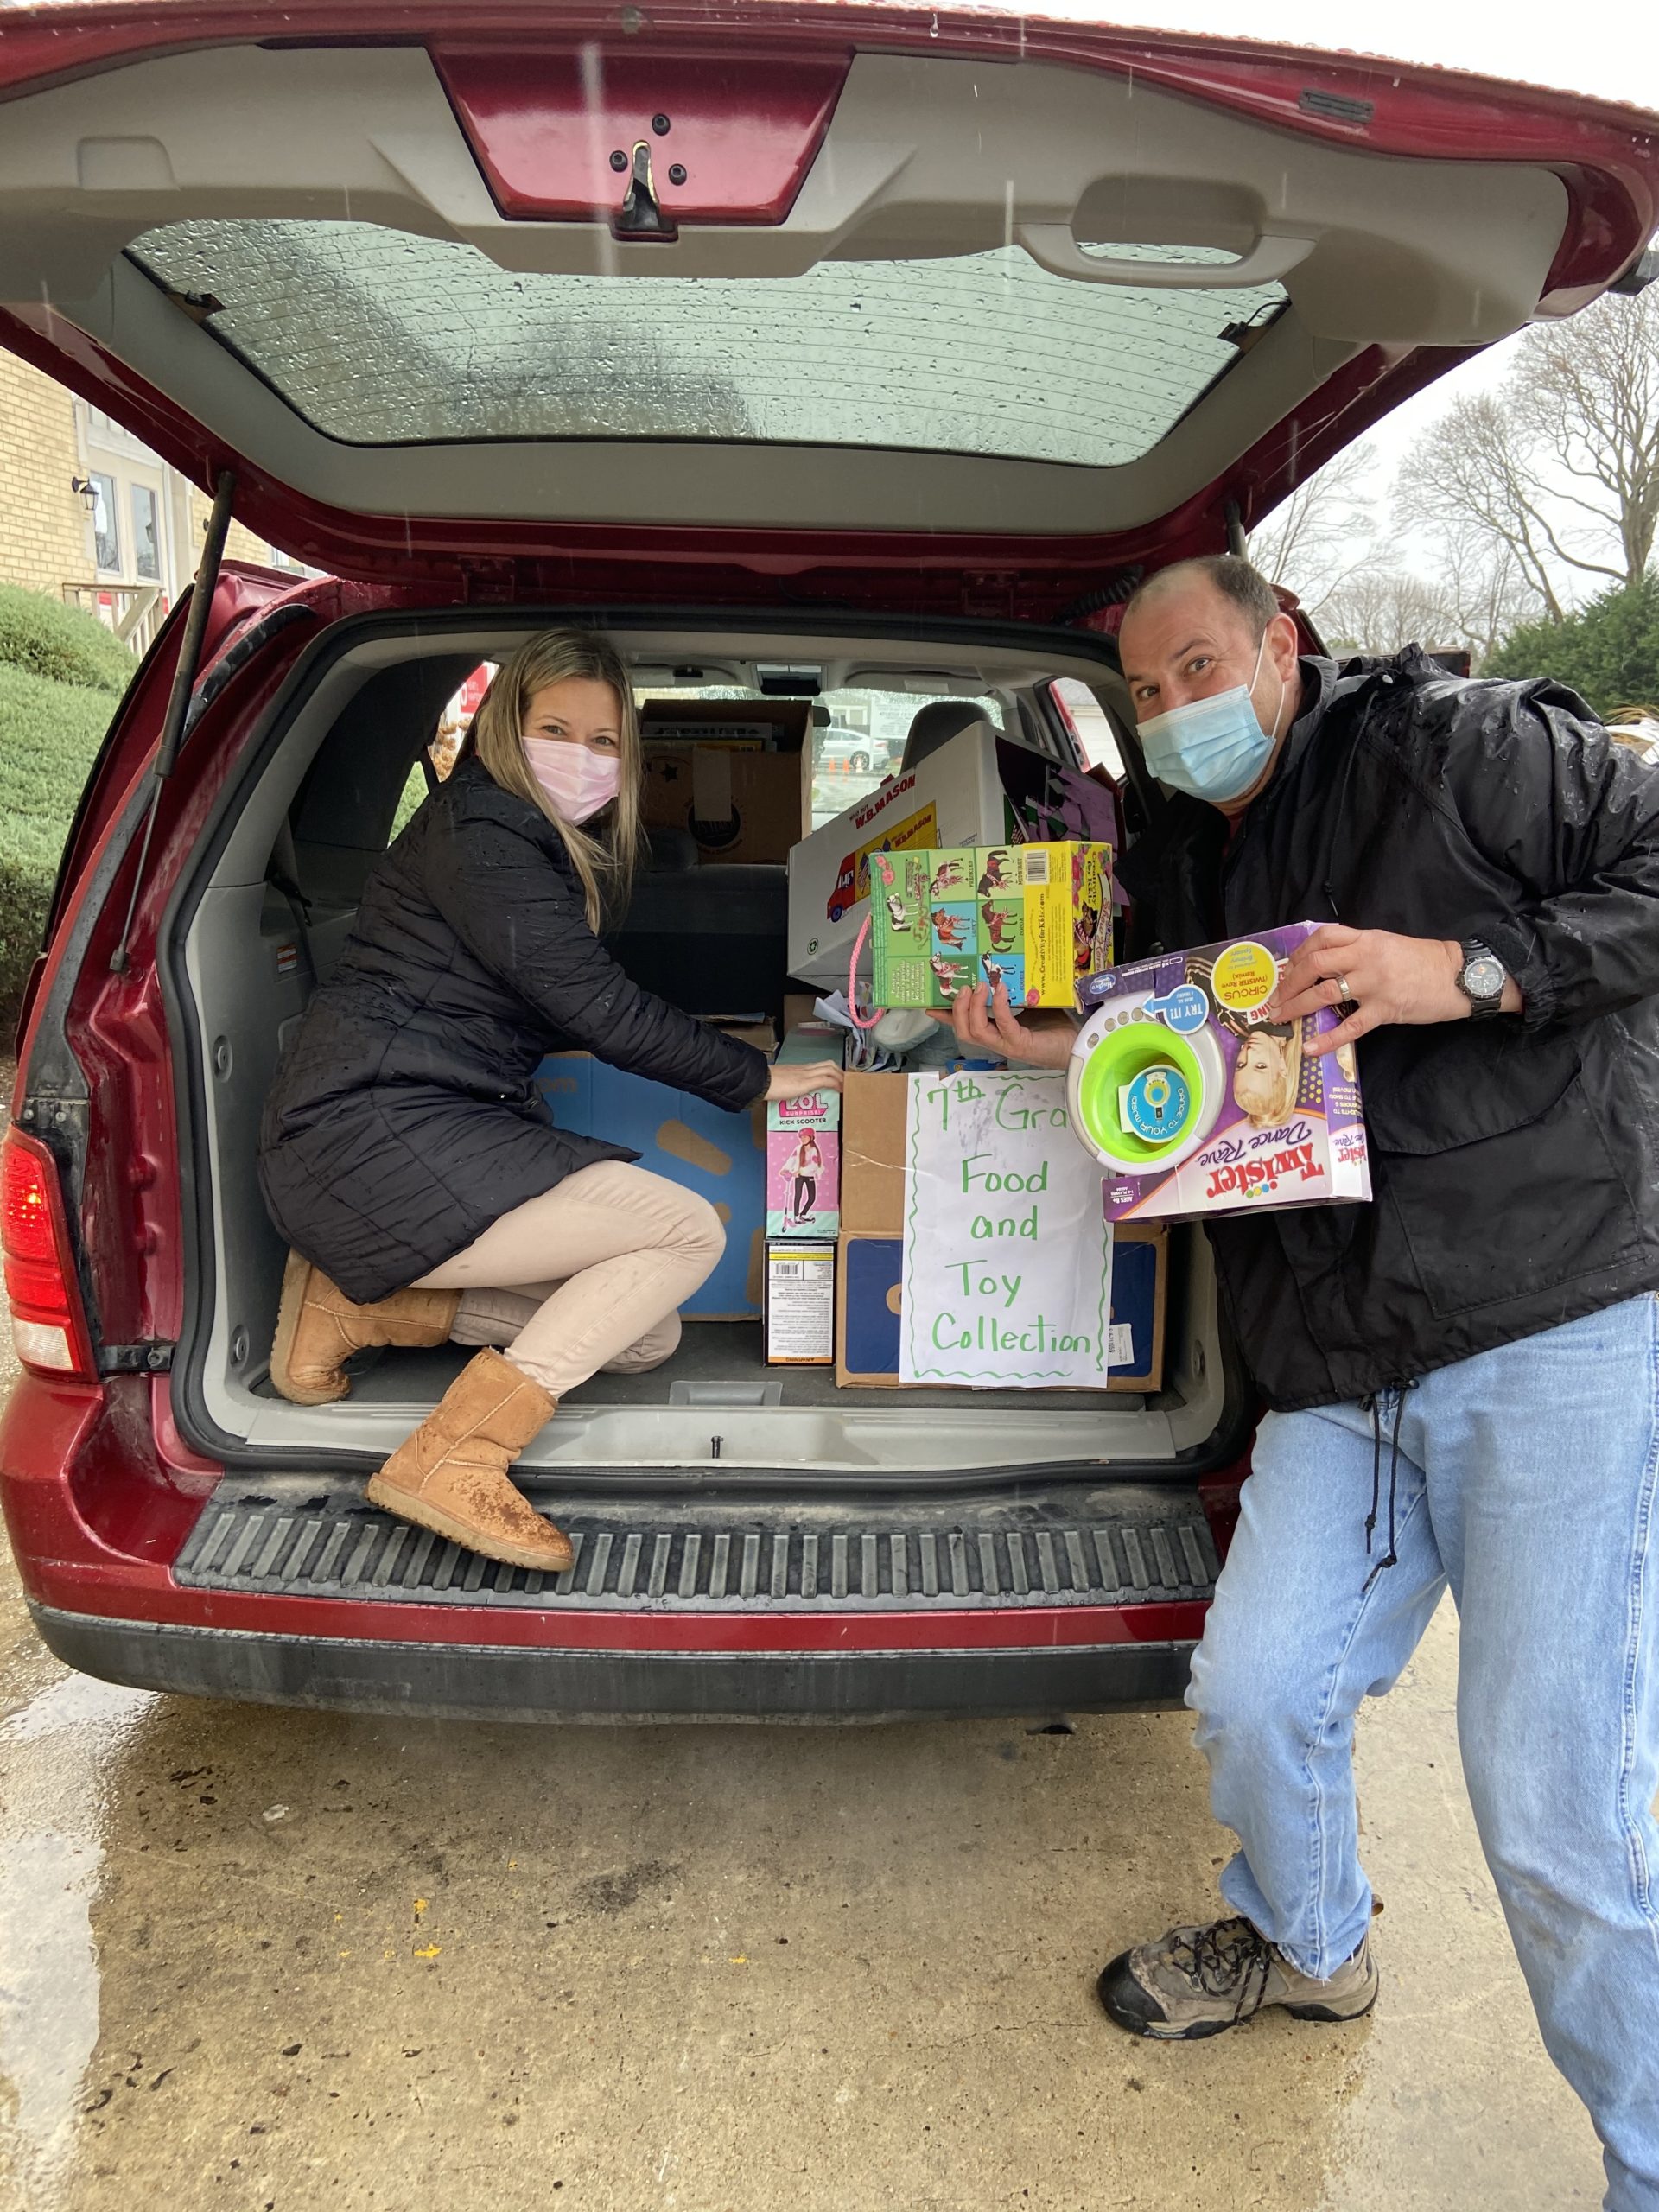 Tuckahoe school custodian Christopher Capalbo helps fifth grade teacher Hillian Cagno with food and toy drive items collected by members of the Tuckahoe school community and members of the National Junior Honor Society and Student Council which donated over 700 items to Heart of the Hamptons.